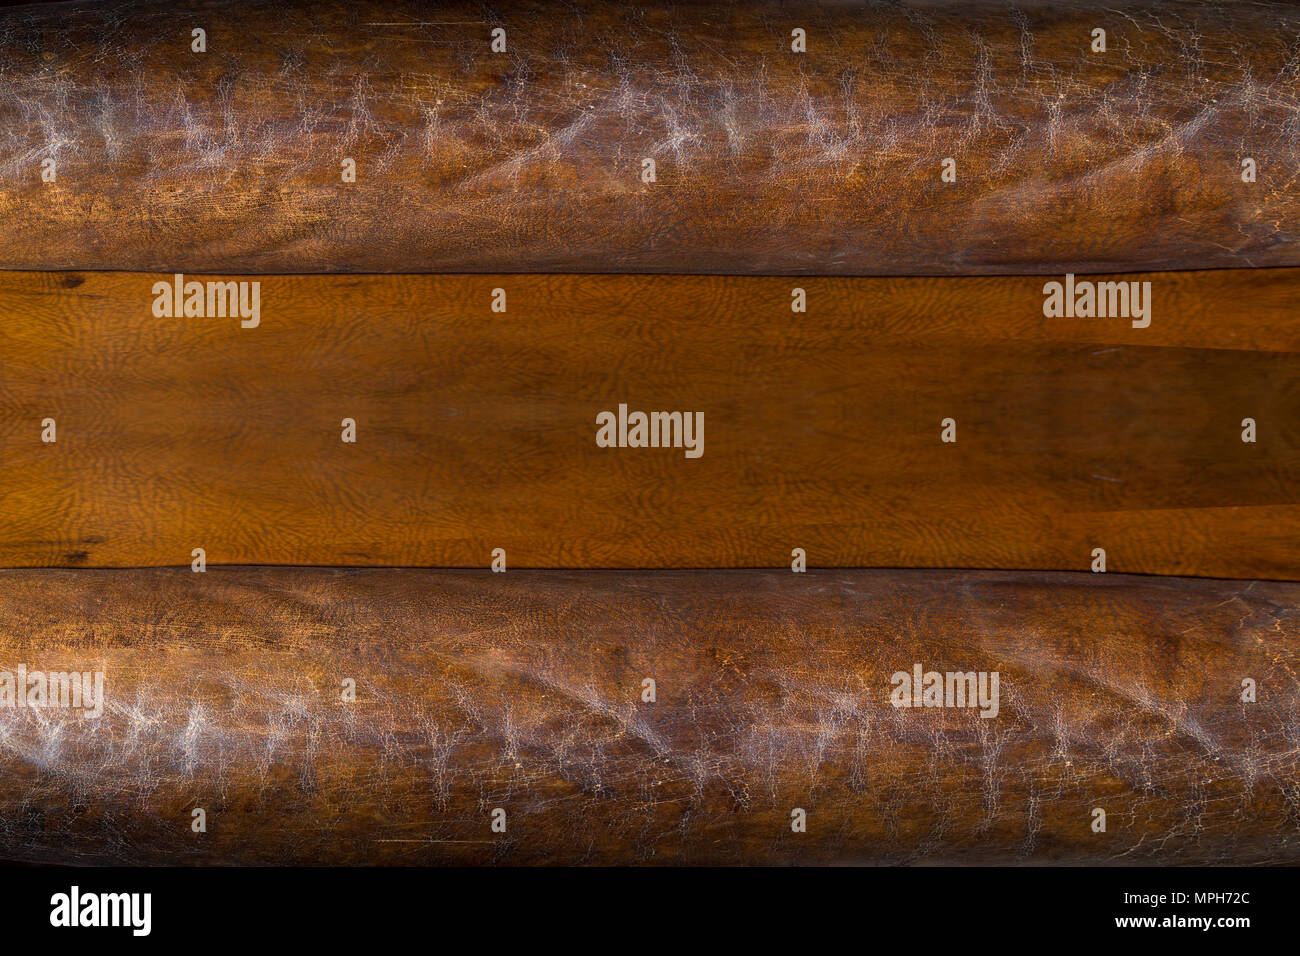 old brown leather, wooden surface in the middle with space for text, background image Stock Photo